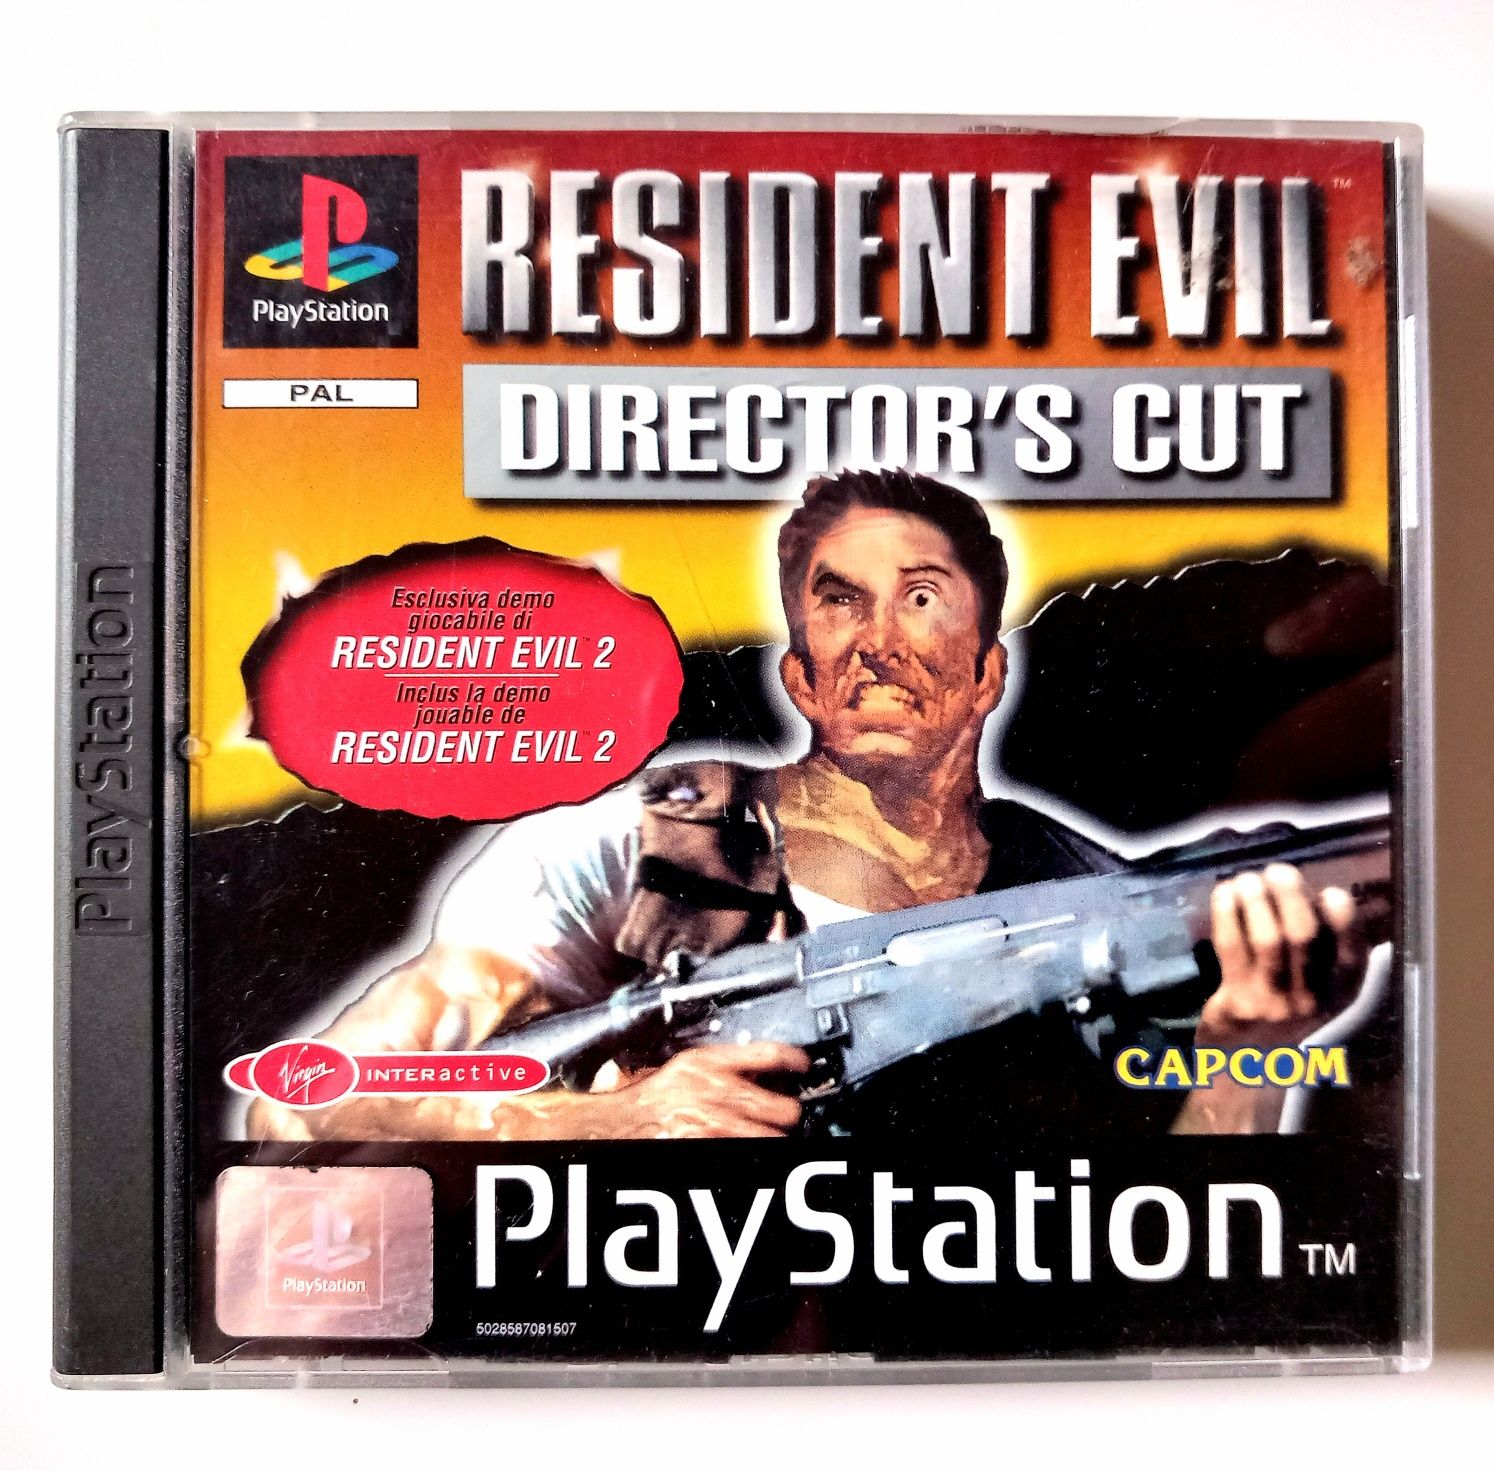 Resident Evil Director's Cut (PS1)